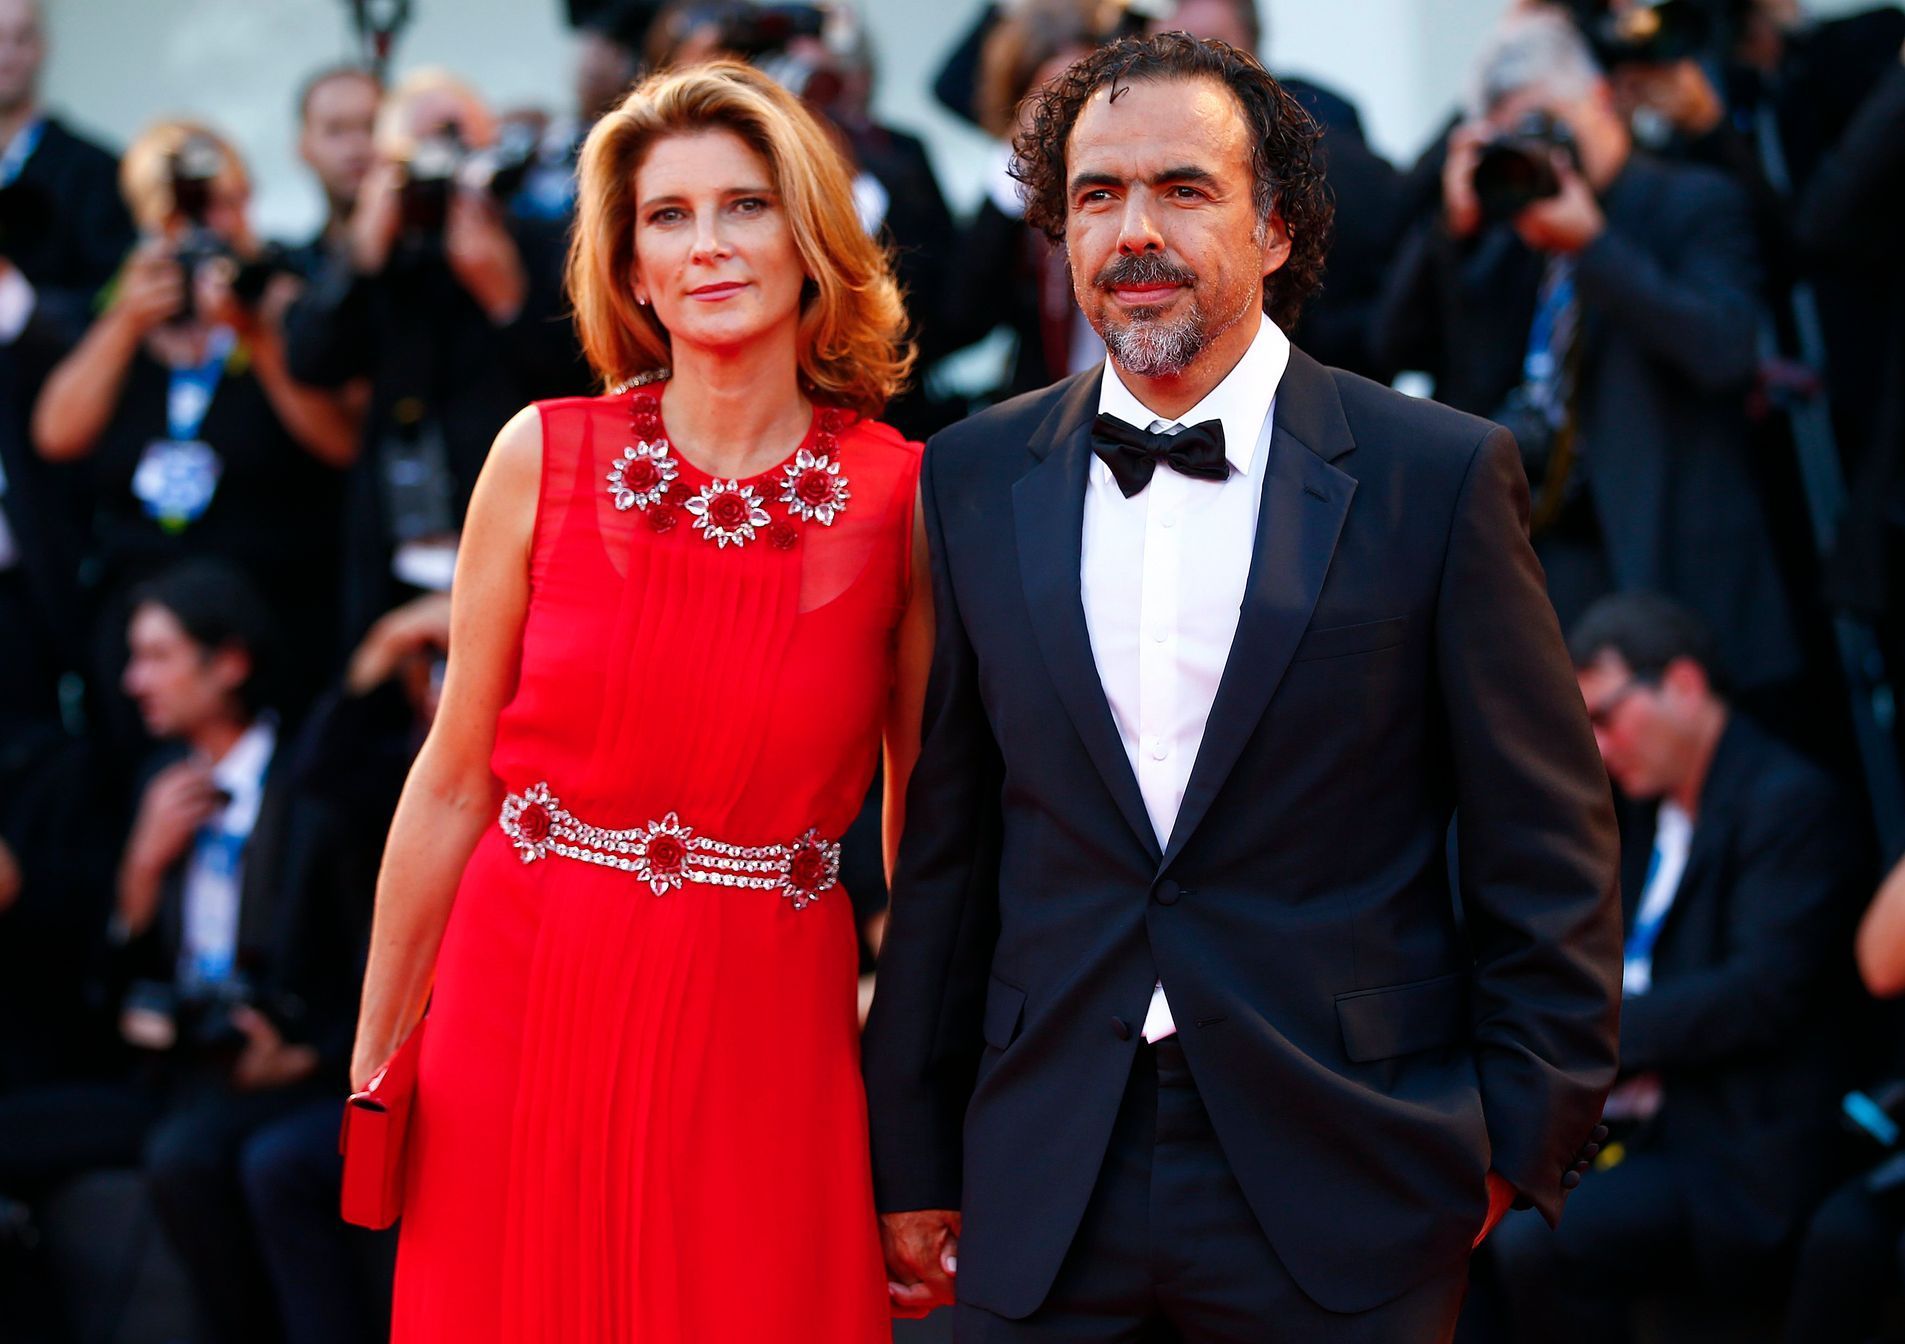 Director Inarritu poses with her wife Hagerman during the red carpet for the movie &quot;Birdman or (The unexpected virtue of ignorance)&quot; at the 71st Venice Film Festival